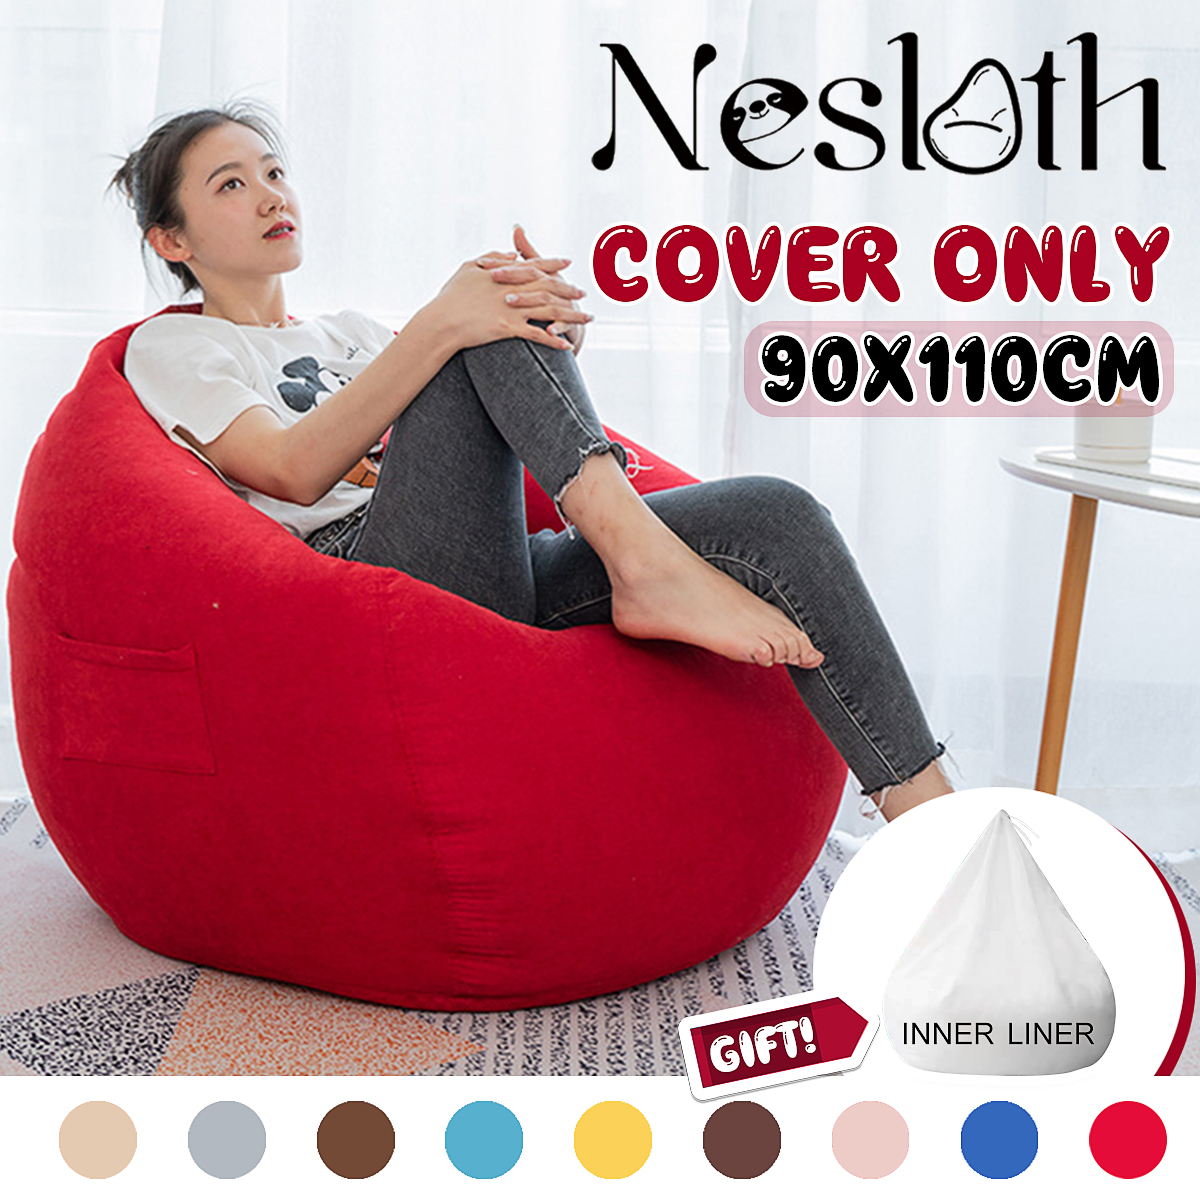 NESLOTH 90*110cm Soft Bean Bag Chairs Couch Sofa Cover Indoor Lazy Sofa For Adults 9